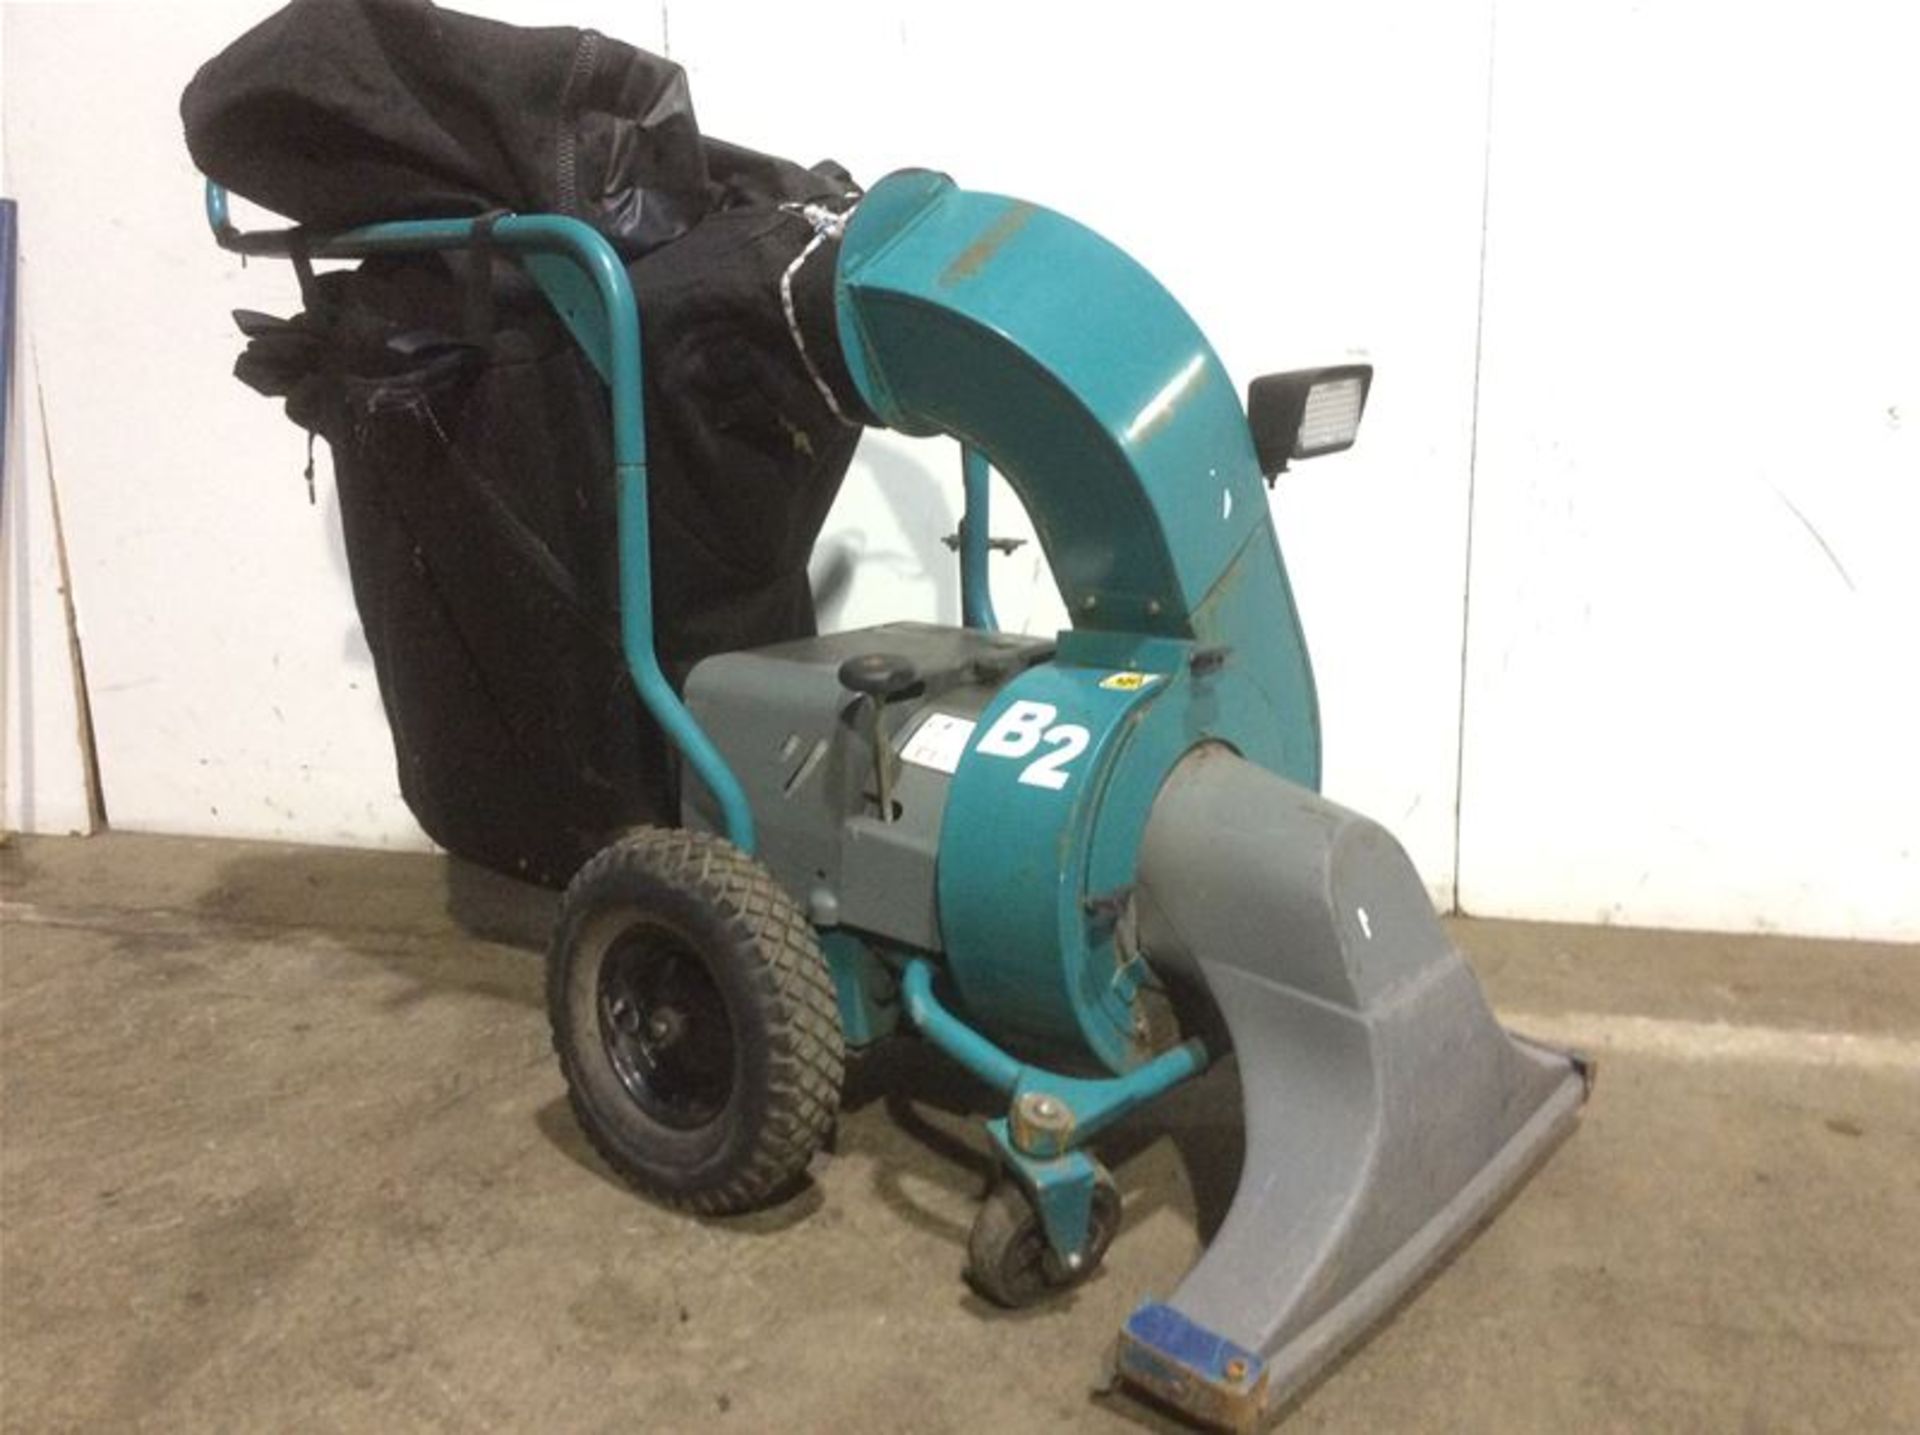 TENNANT B2 LITTER VACUUM - BATTERY OPERATED - Image 2 of 3